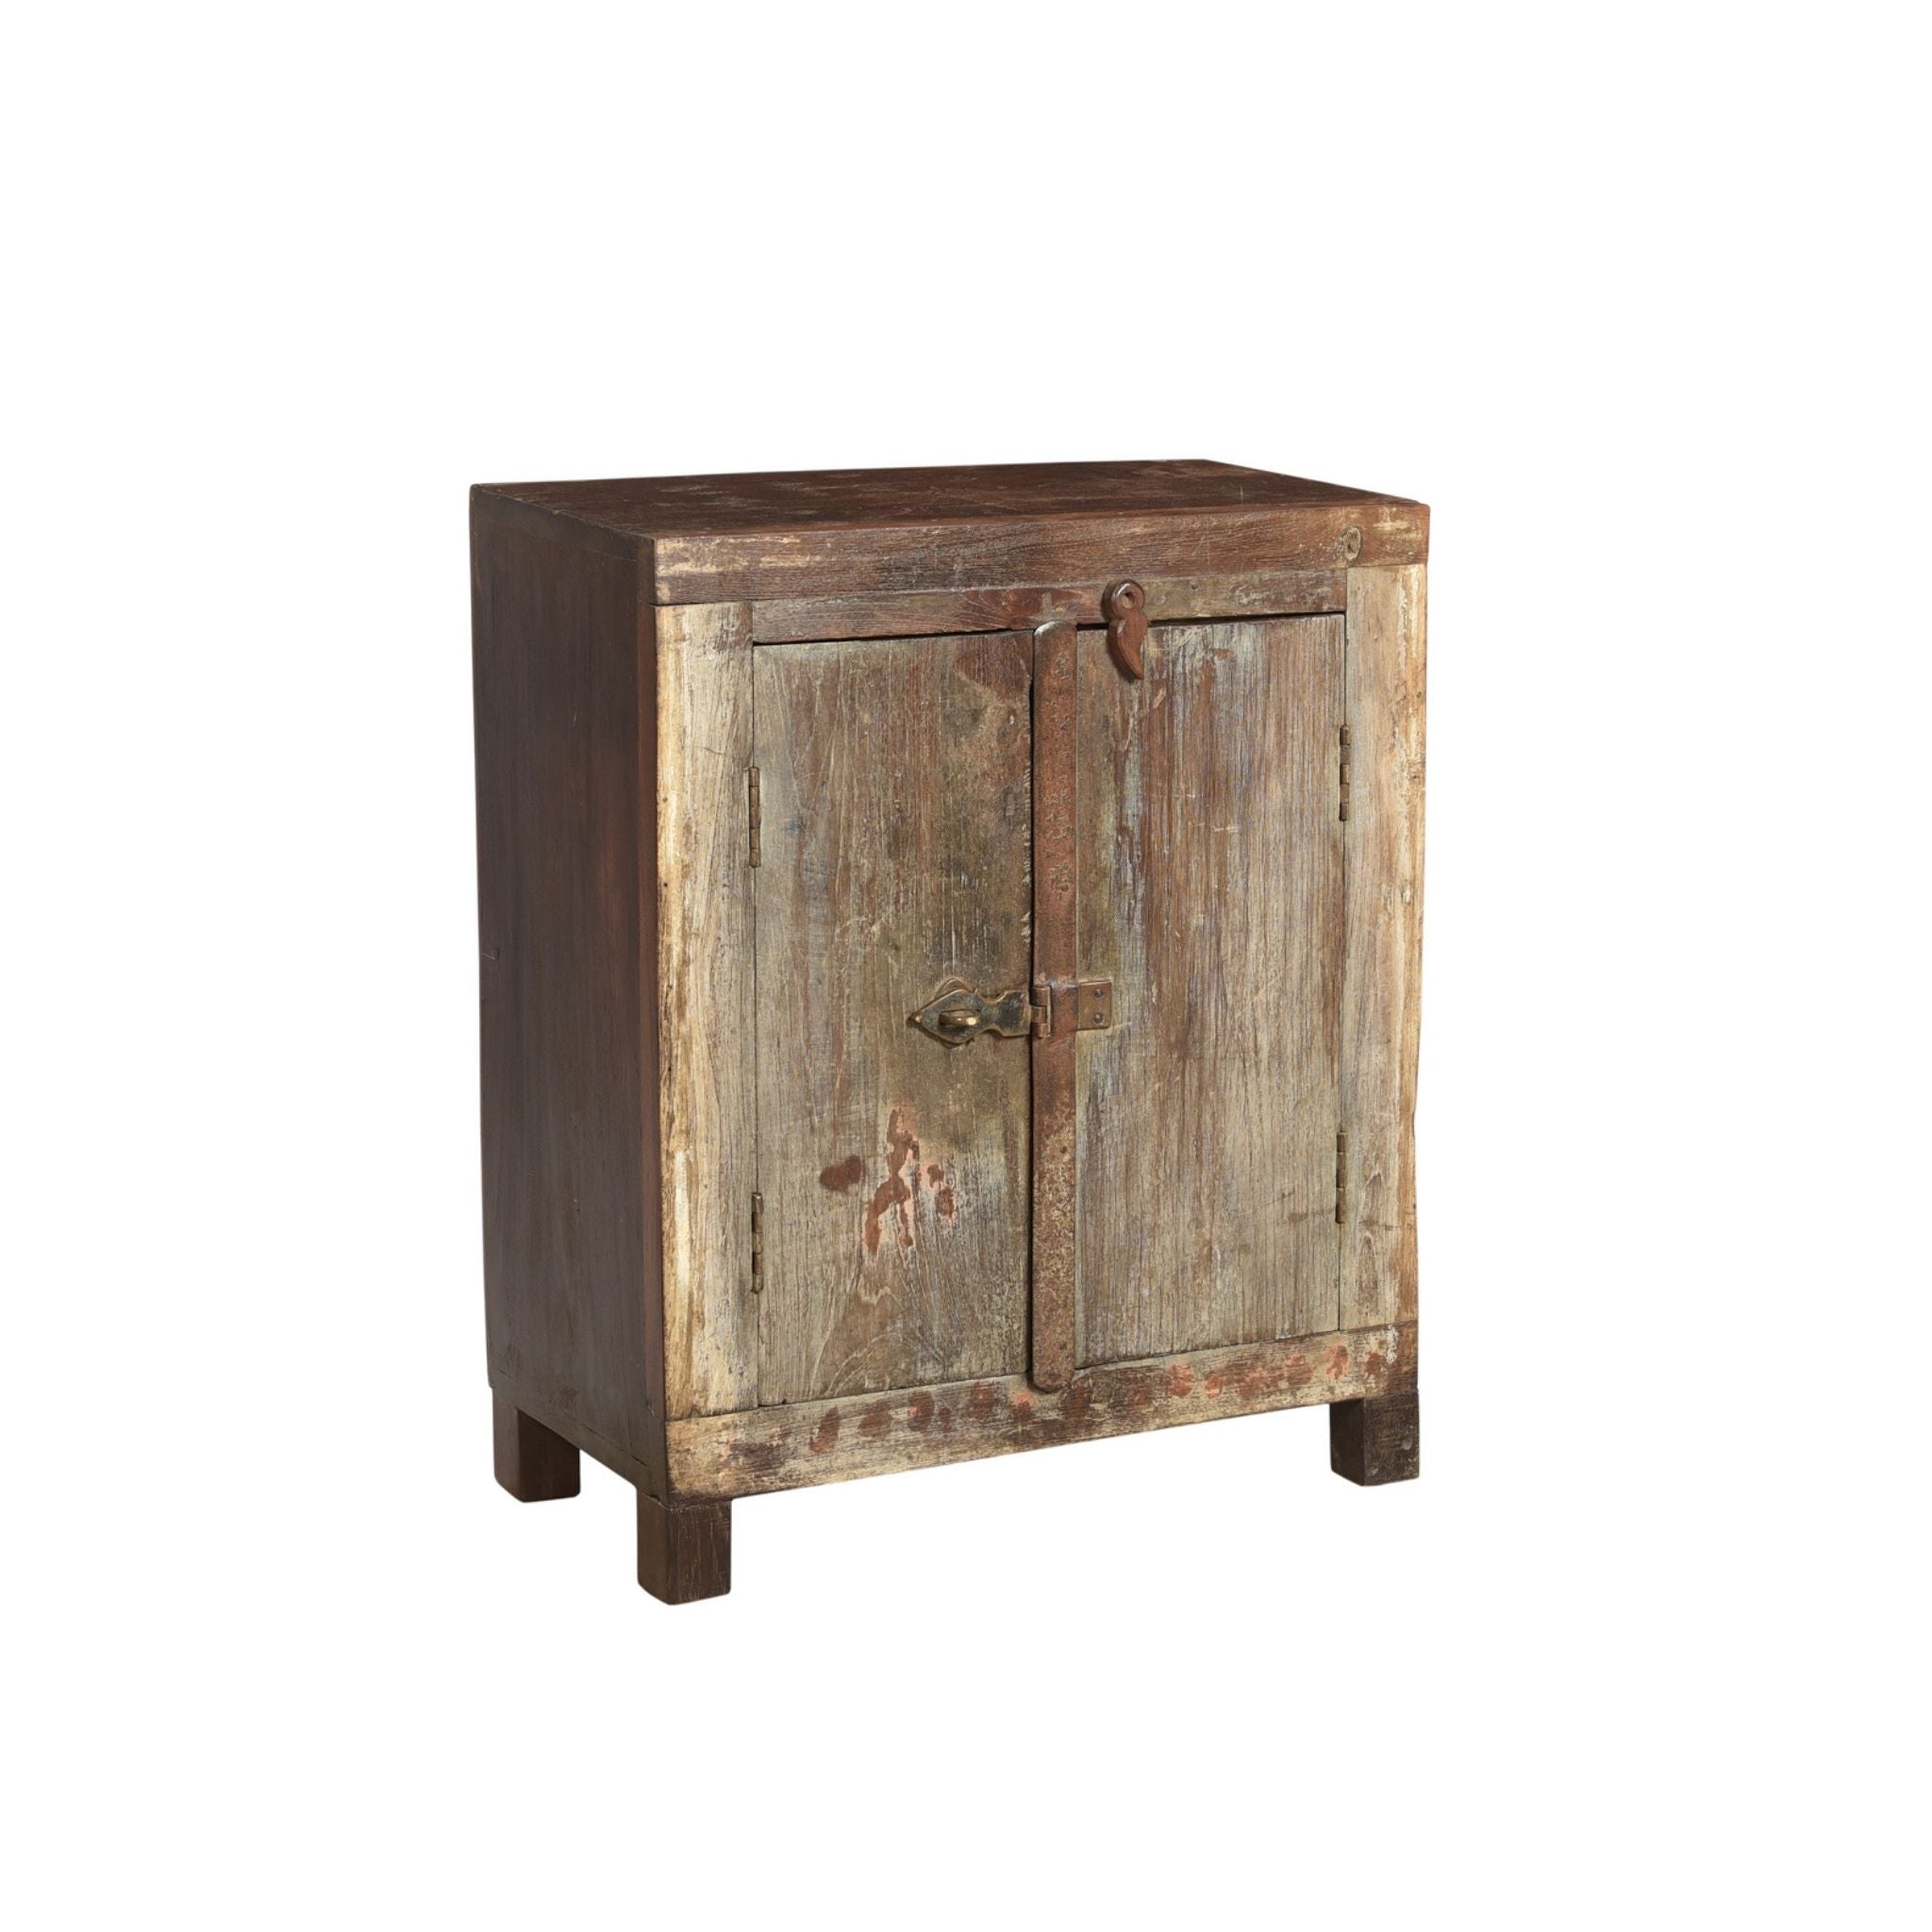 Siberian Locker Distressed Wood With latch Side View